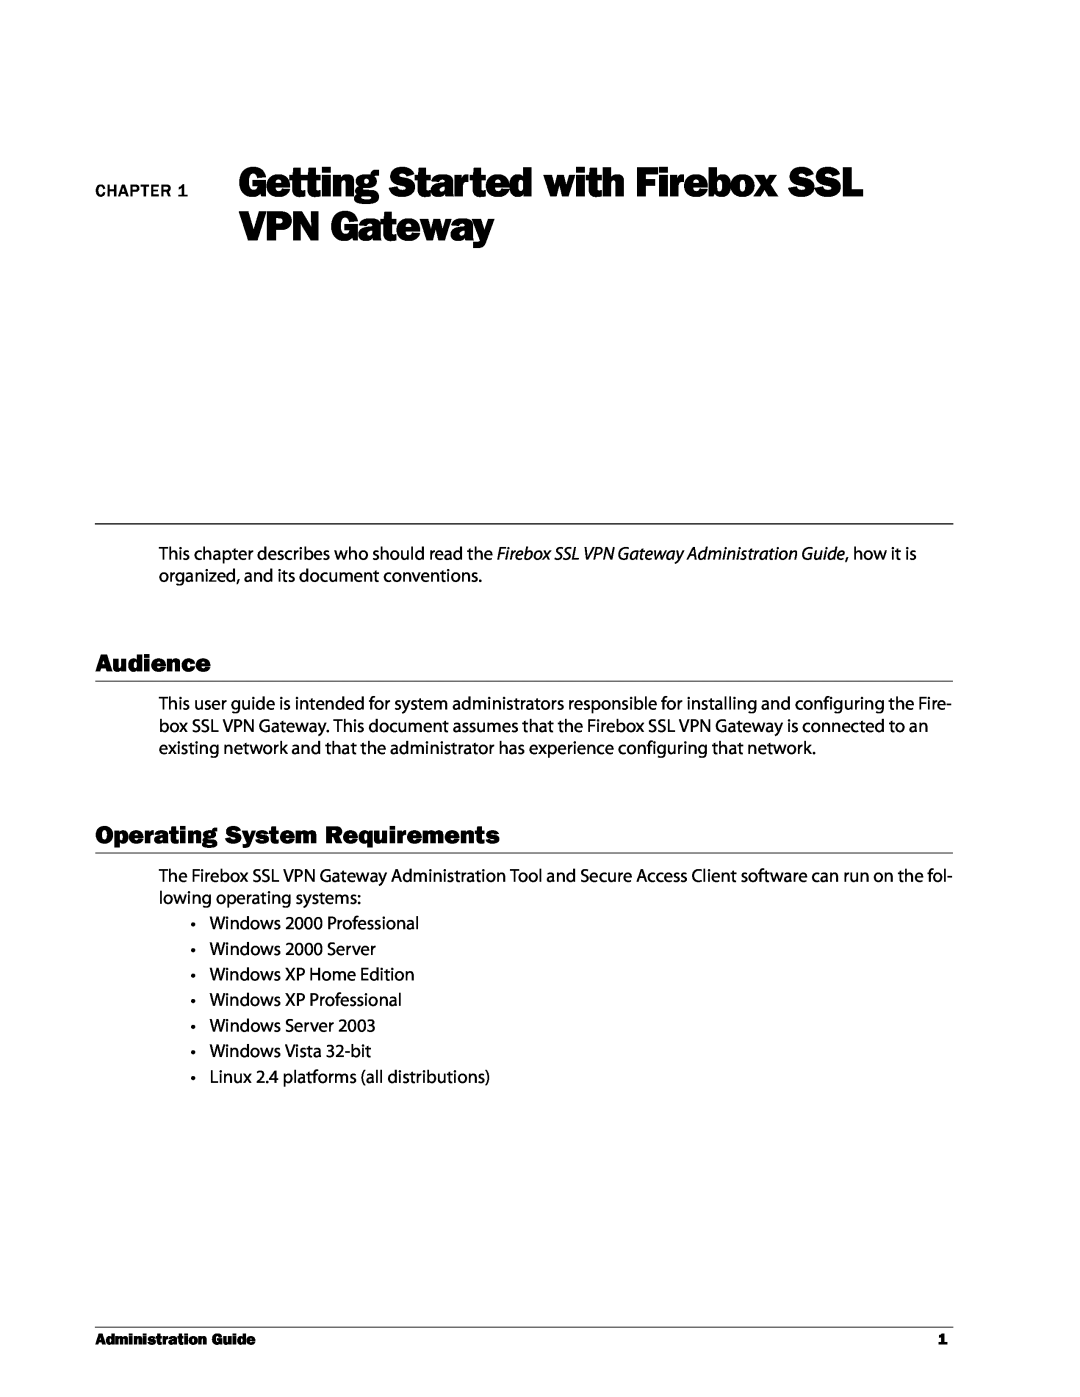 WatchGuard Technologies SSL VPN Getting Started with Firebox SSL, VPN Gateway, Audience, Operating System Requirements 